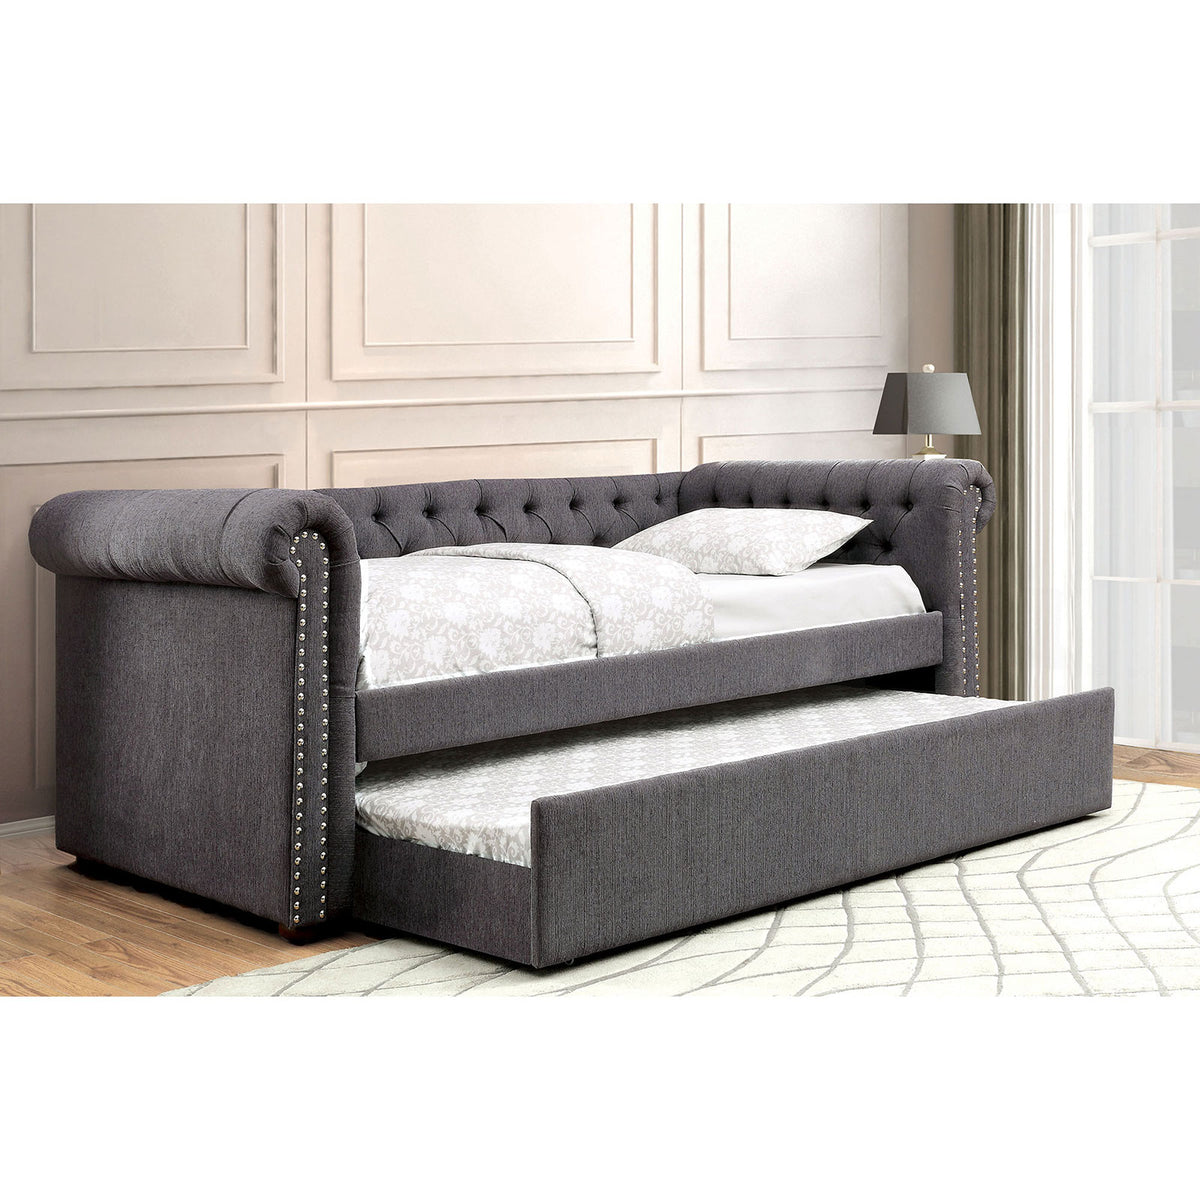 LEANNA Gray Daybed w/ Trundle, Gray  Half Price Furniture